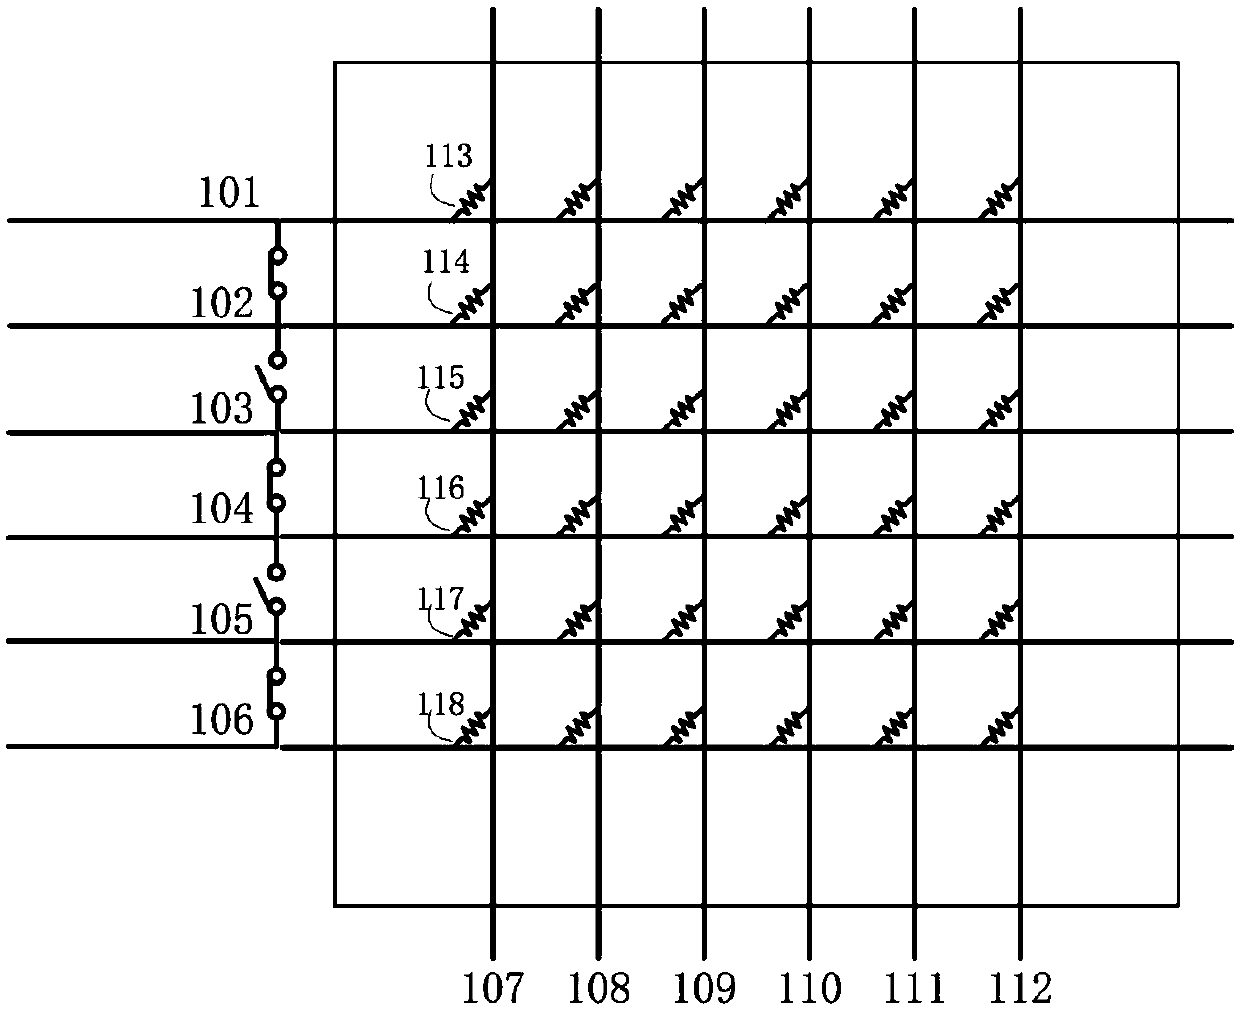 Memristor resistance state number expansion structure and a related method